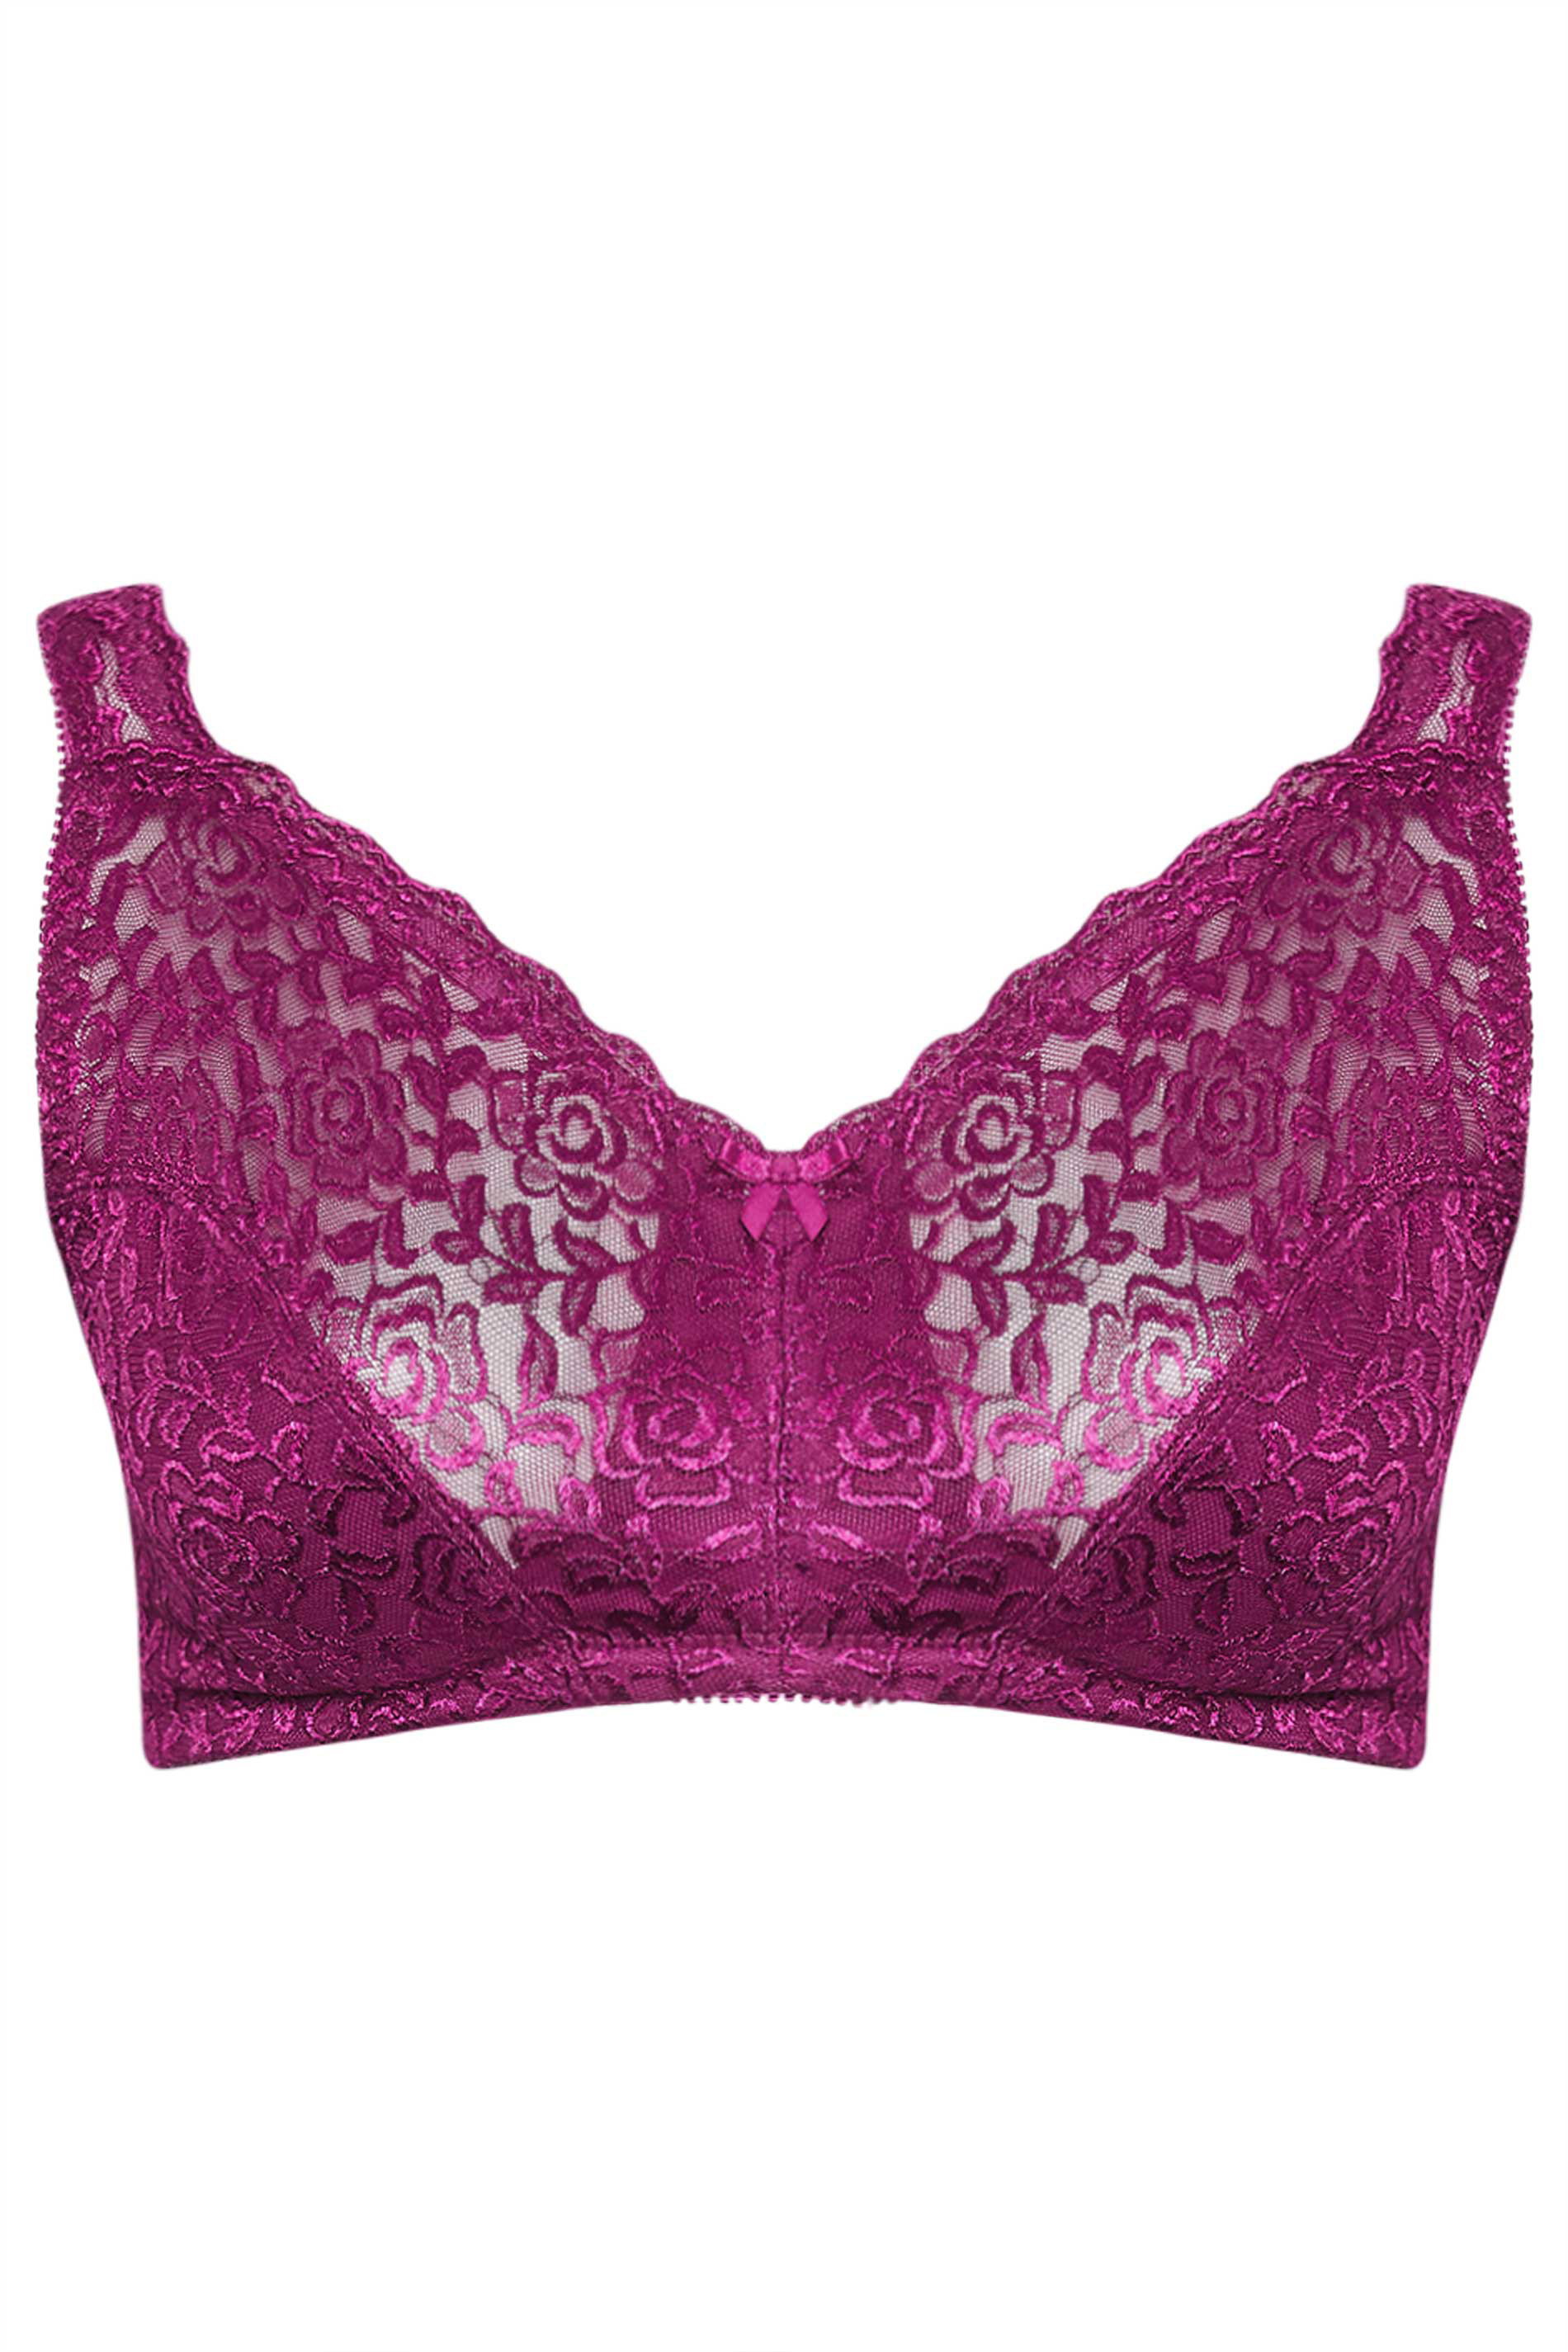 Marks & Spencer Women's Floral Lace Non Padded Underwired Full Cup Bra